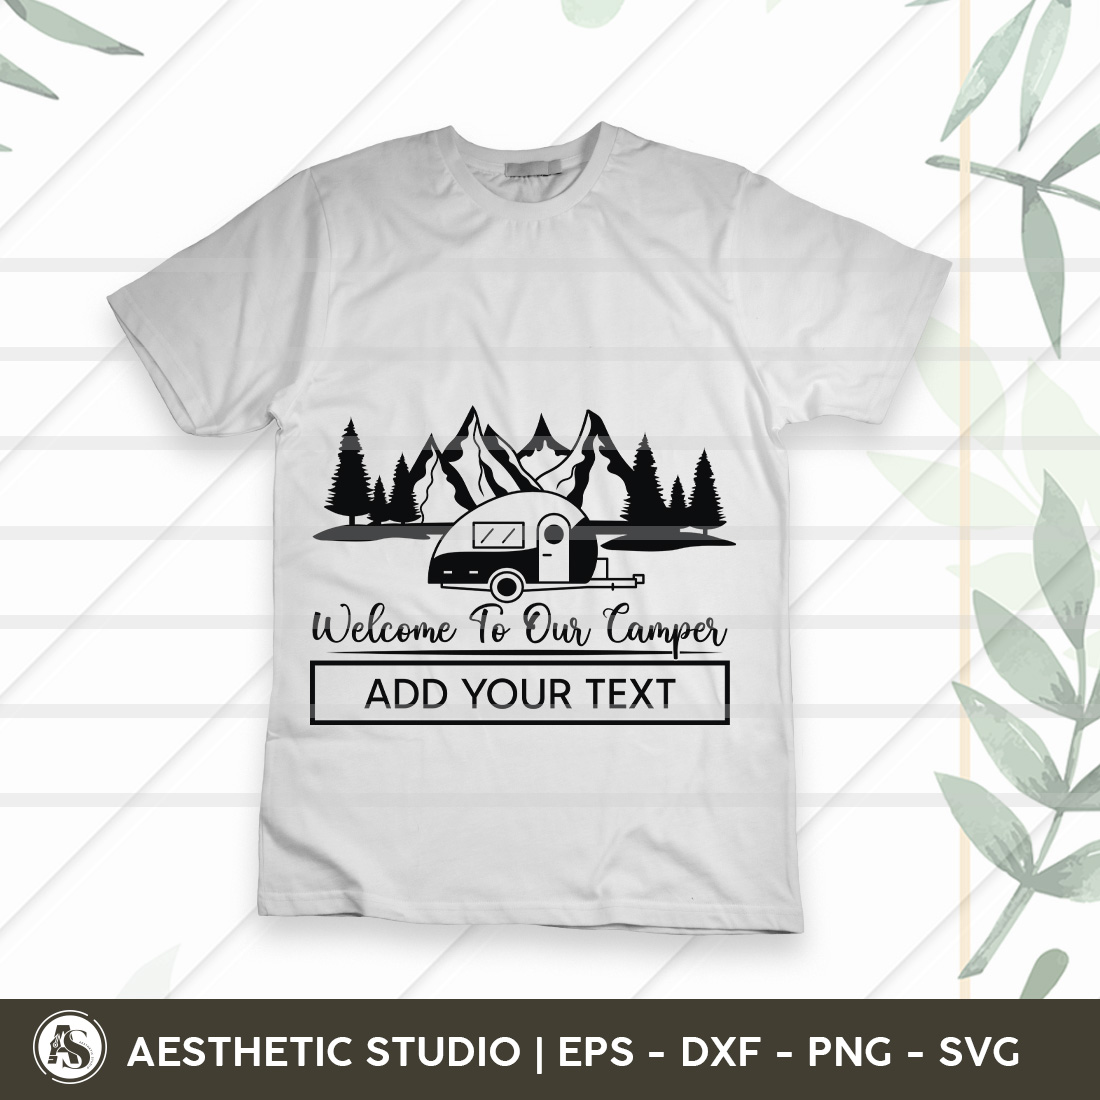 Welcome To Our Camper, Adventure, Camp Life, Camping Svg, Typography, Camping Quotes, Camping Cut File, Funny Camping, Camping T-shirt Design preview image.